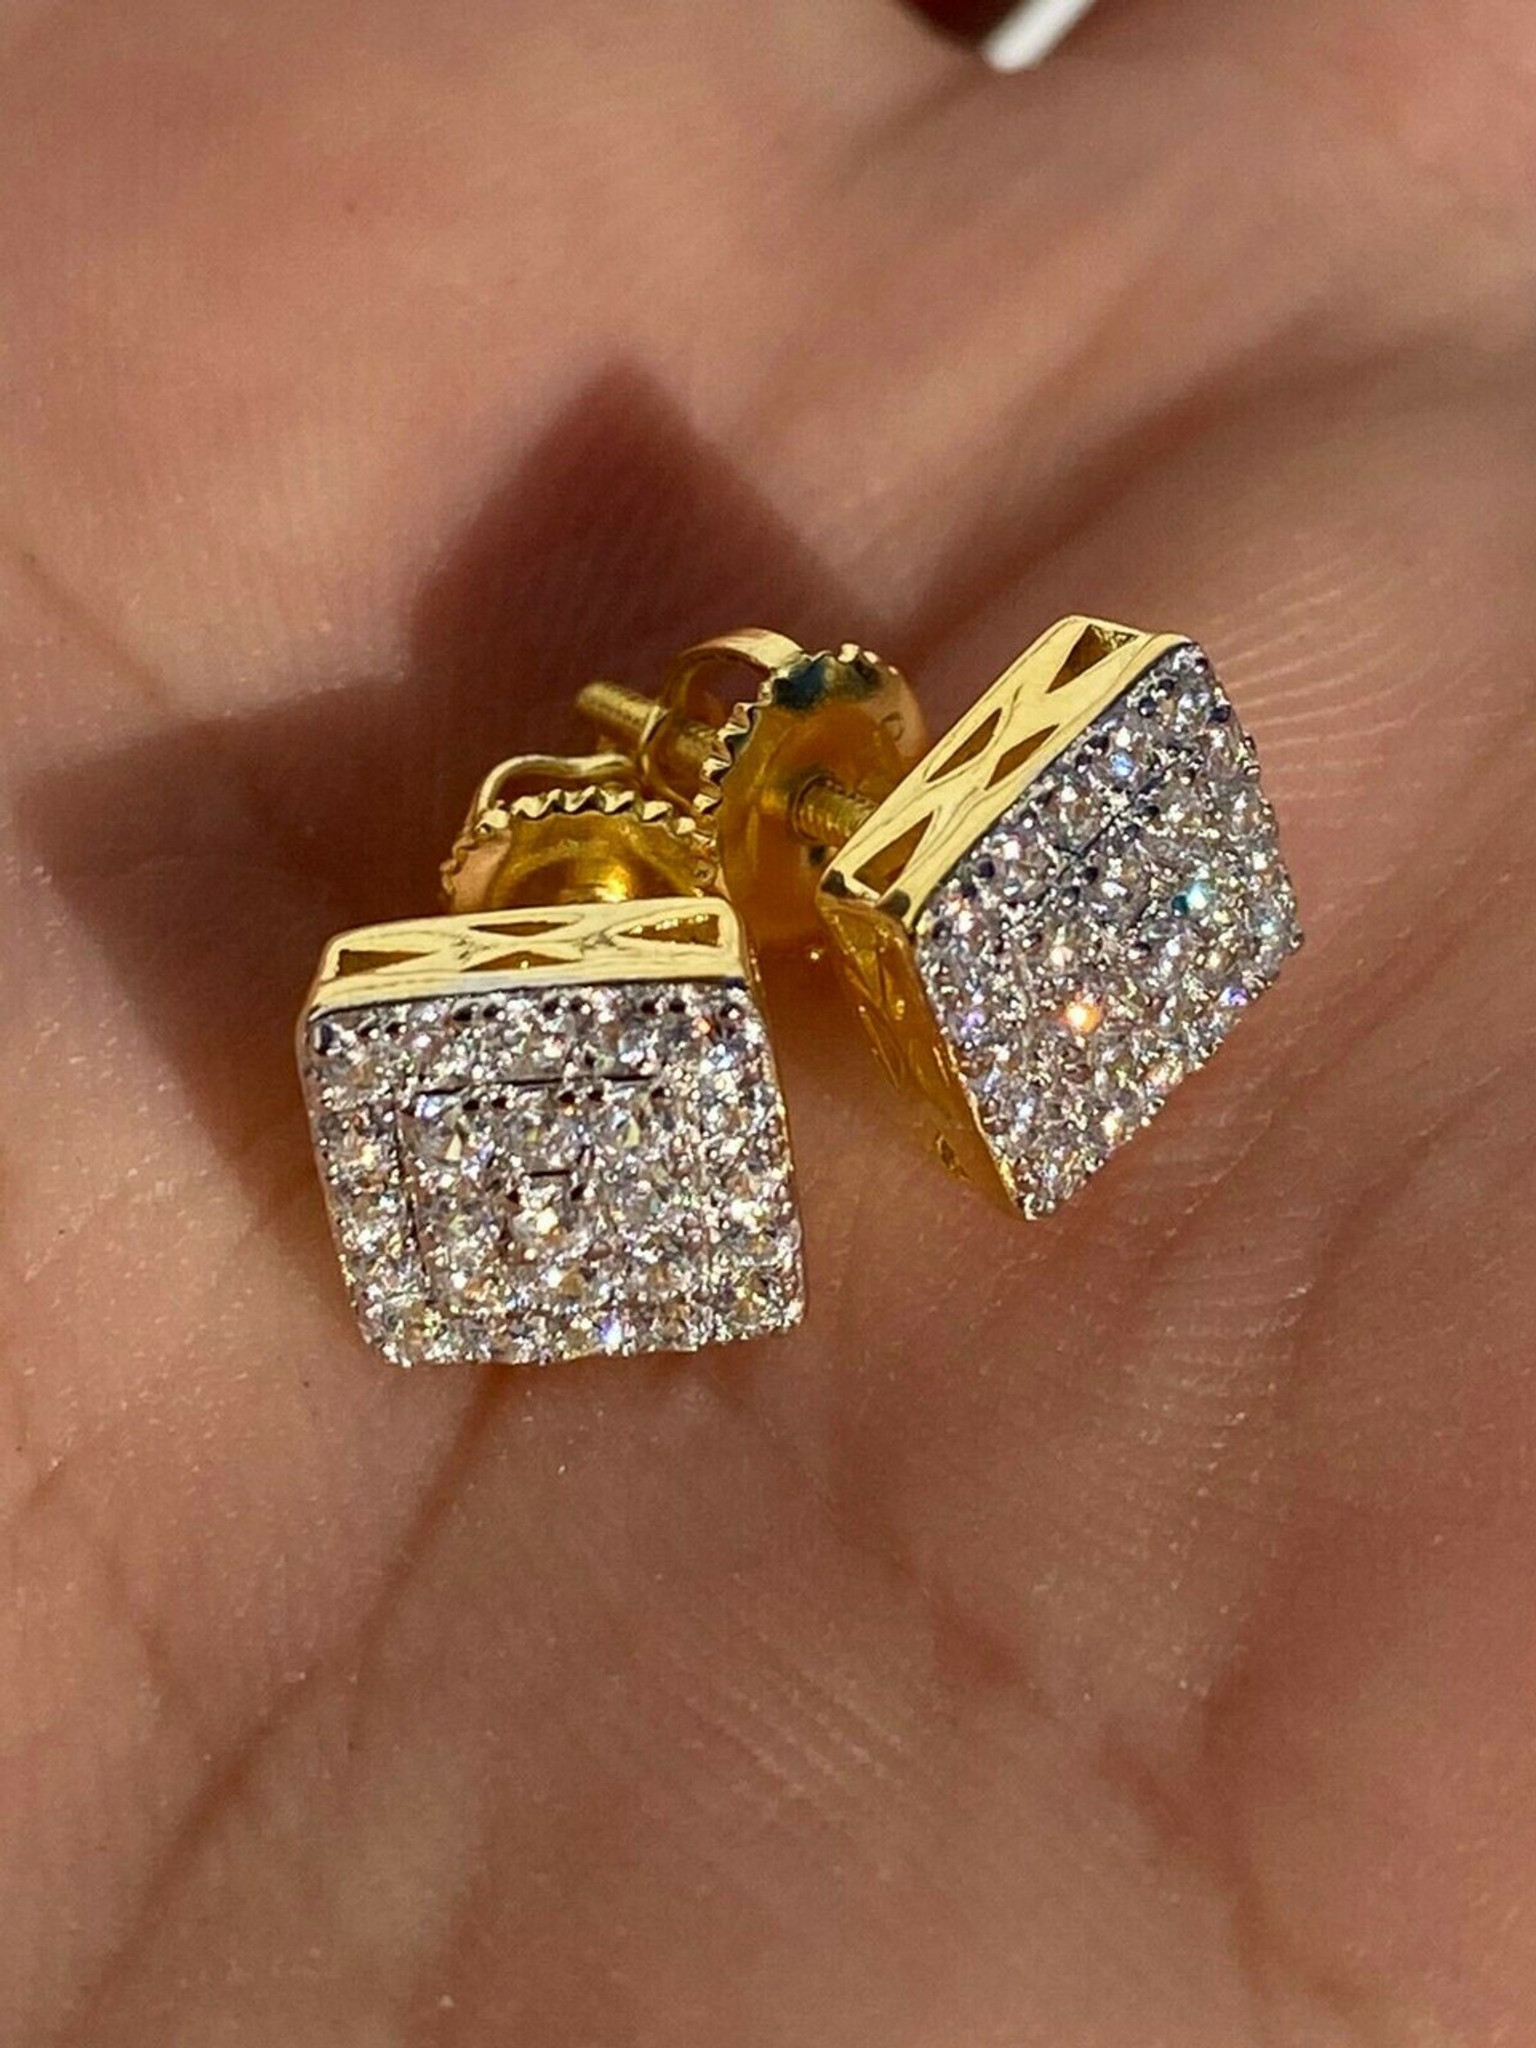 Real Solid 925 Silver Iced Diamond Earrings Screw Back 14k Gold Finish  Square